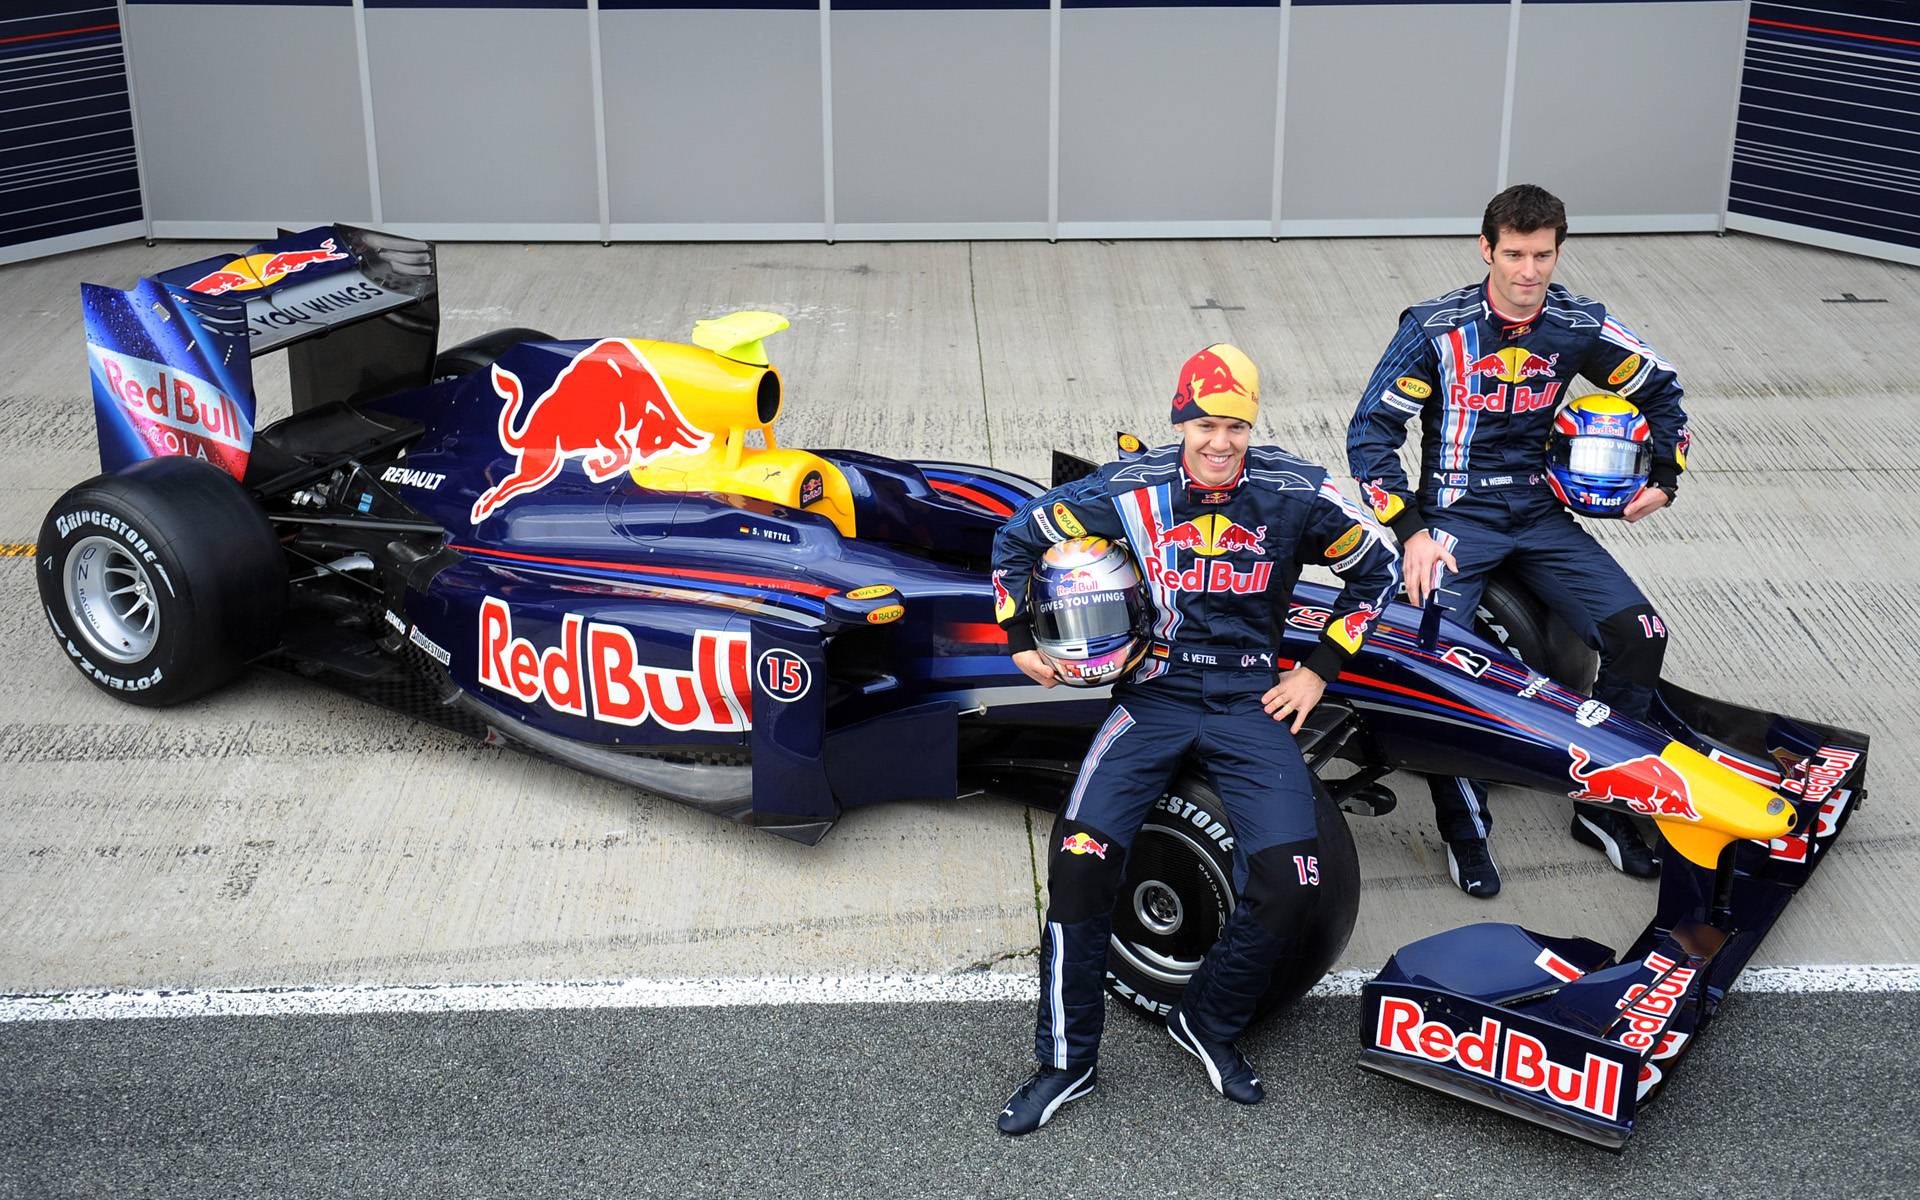 WellManaged HPC Critical to Infiniti Red Bull's Formula One Racing Success